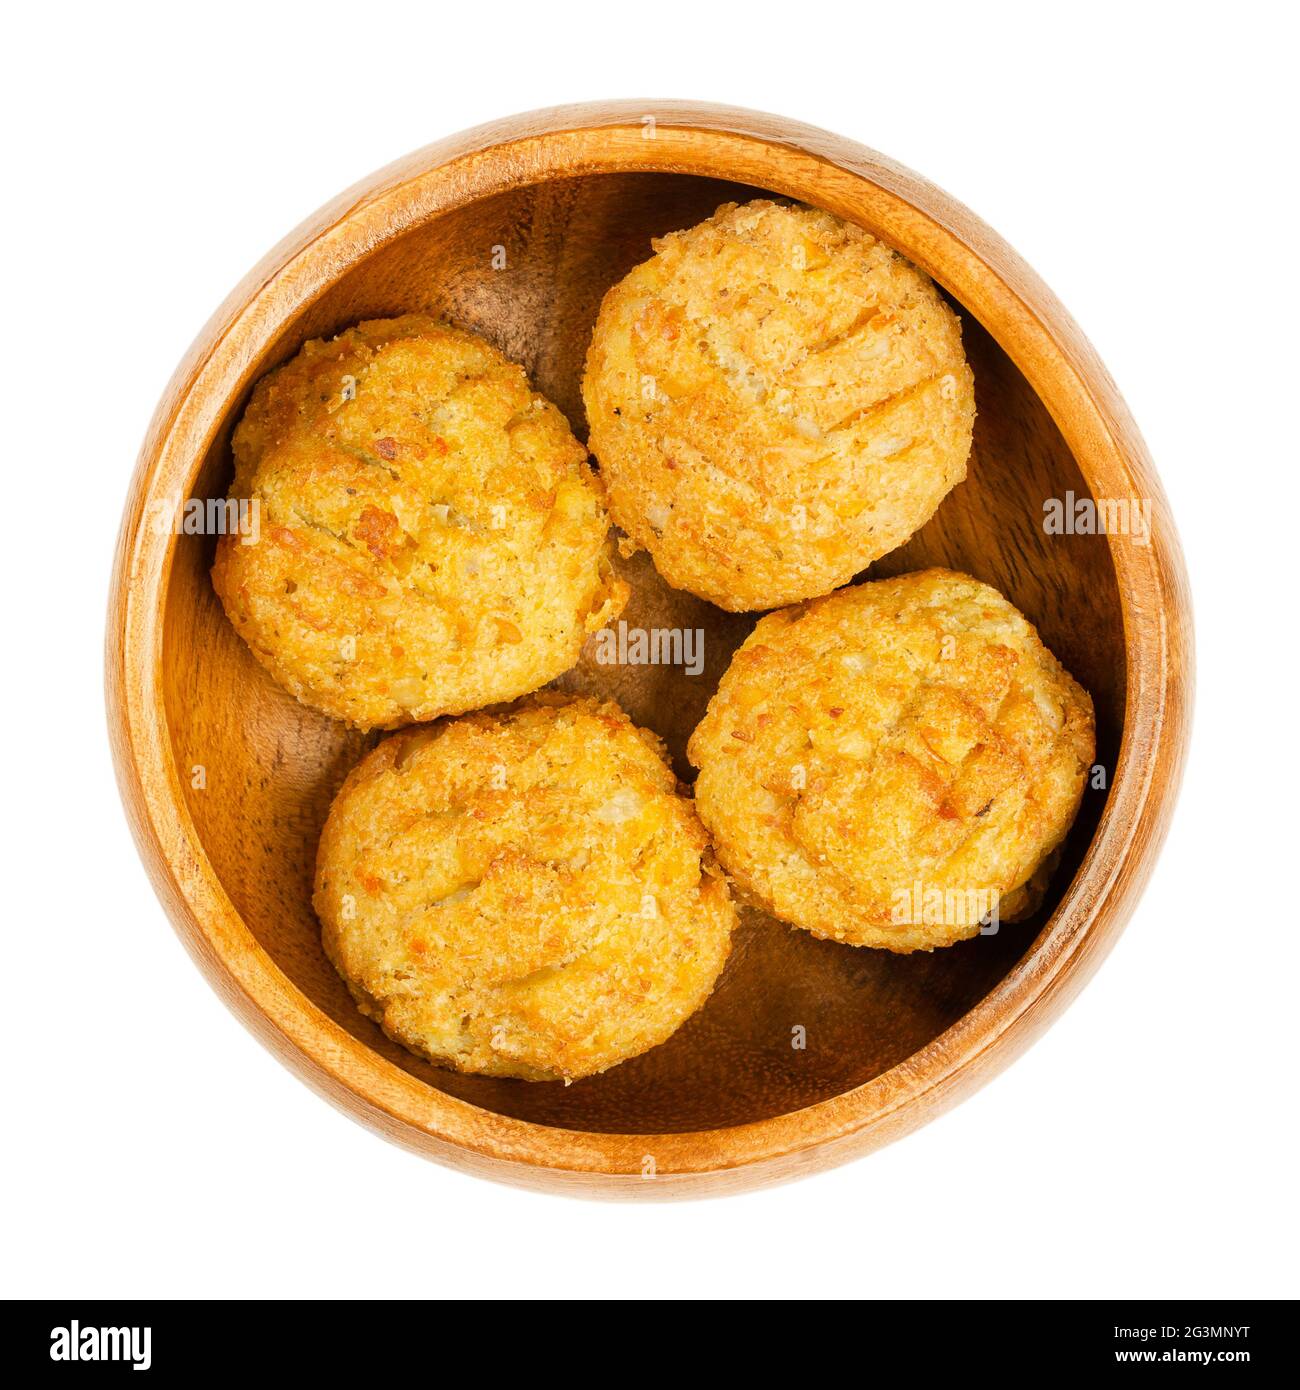 Pre-fried vegan falafel balls, in a wooden bowl. Group of ball shaped fritters, based on chickpeas and rice, a traditional Middle Eastern food. Stock Photo